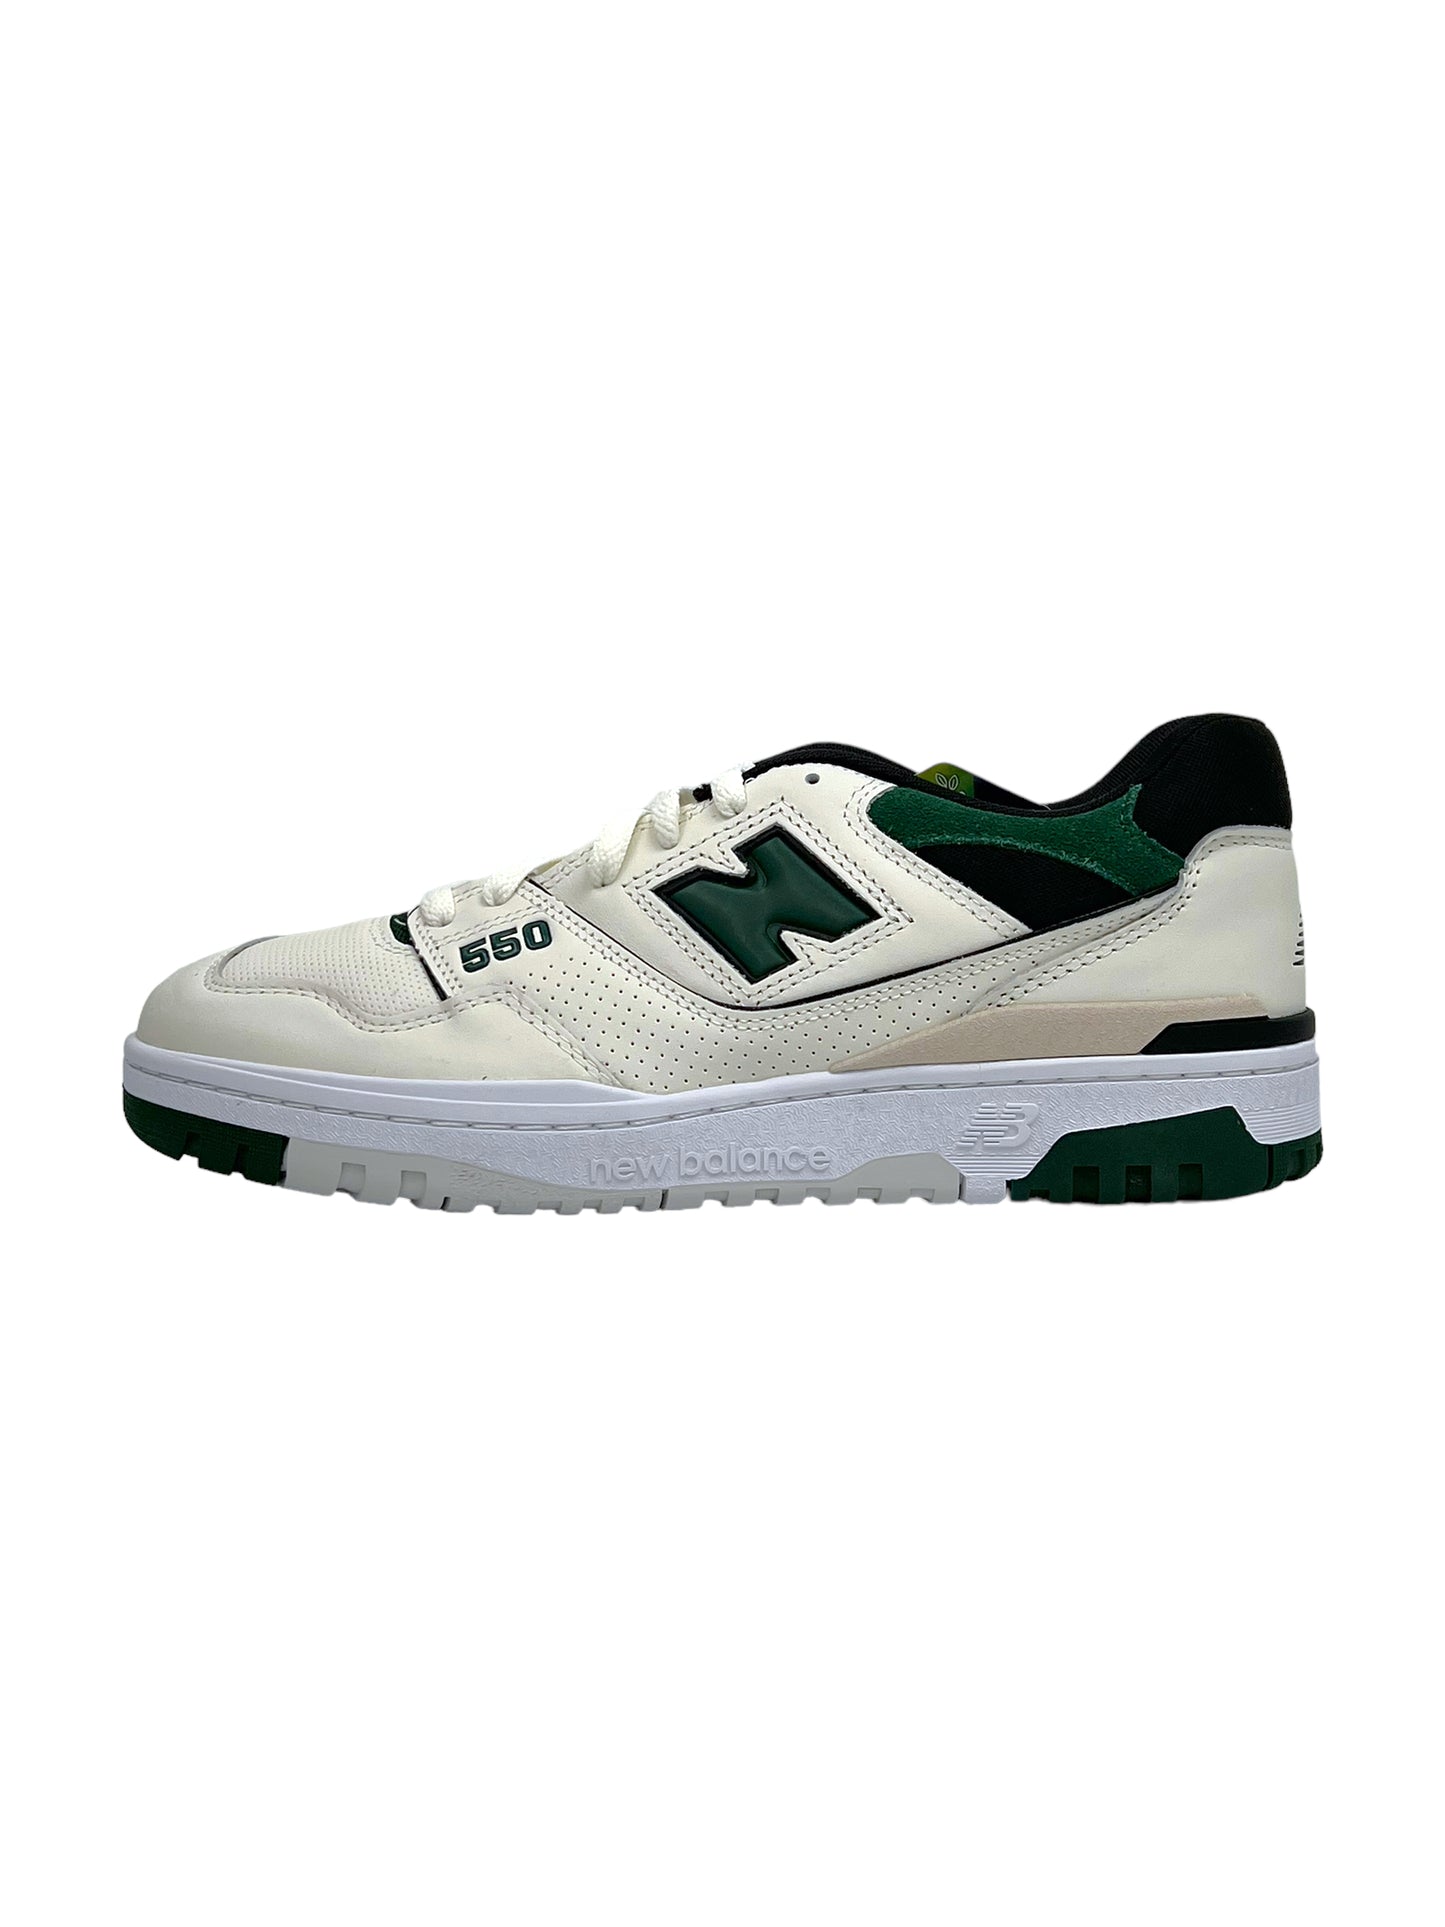 New Balance 550 Sea Salt Pine Green Sneakers - Genuine Design Luxury Consignment for Men. New & Pre-Owned Clothing, Shoes, & Accessories. Calgary, Canada